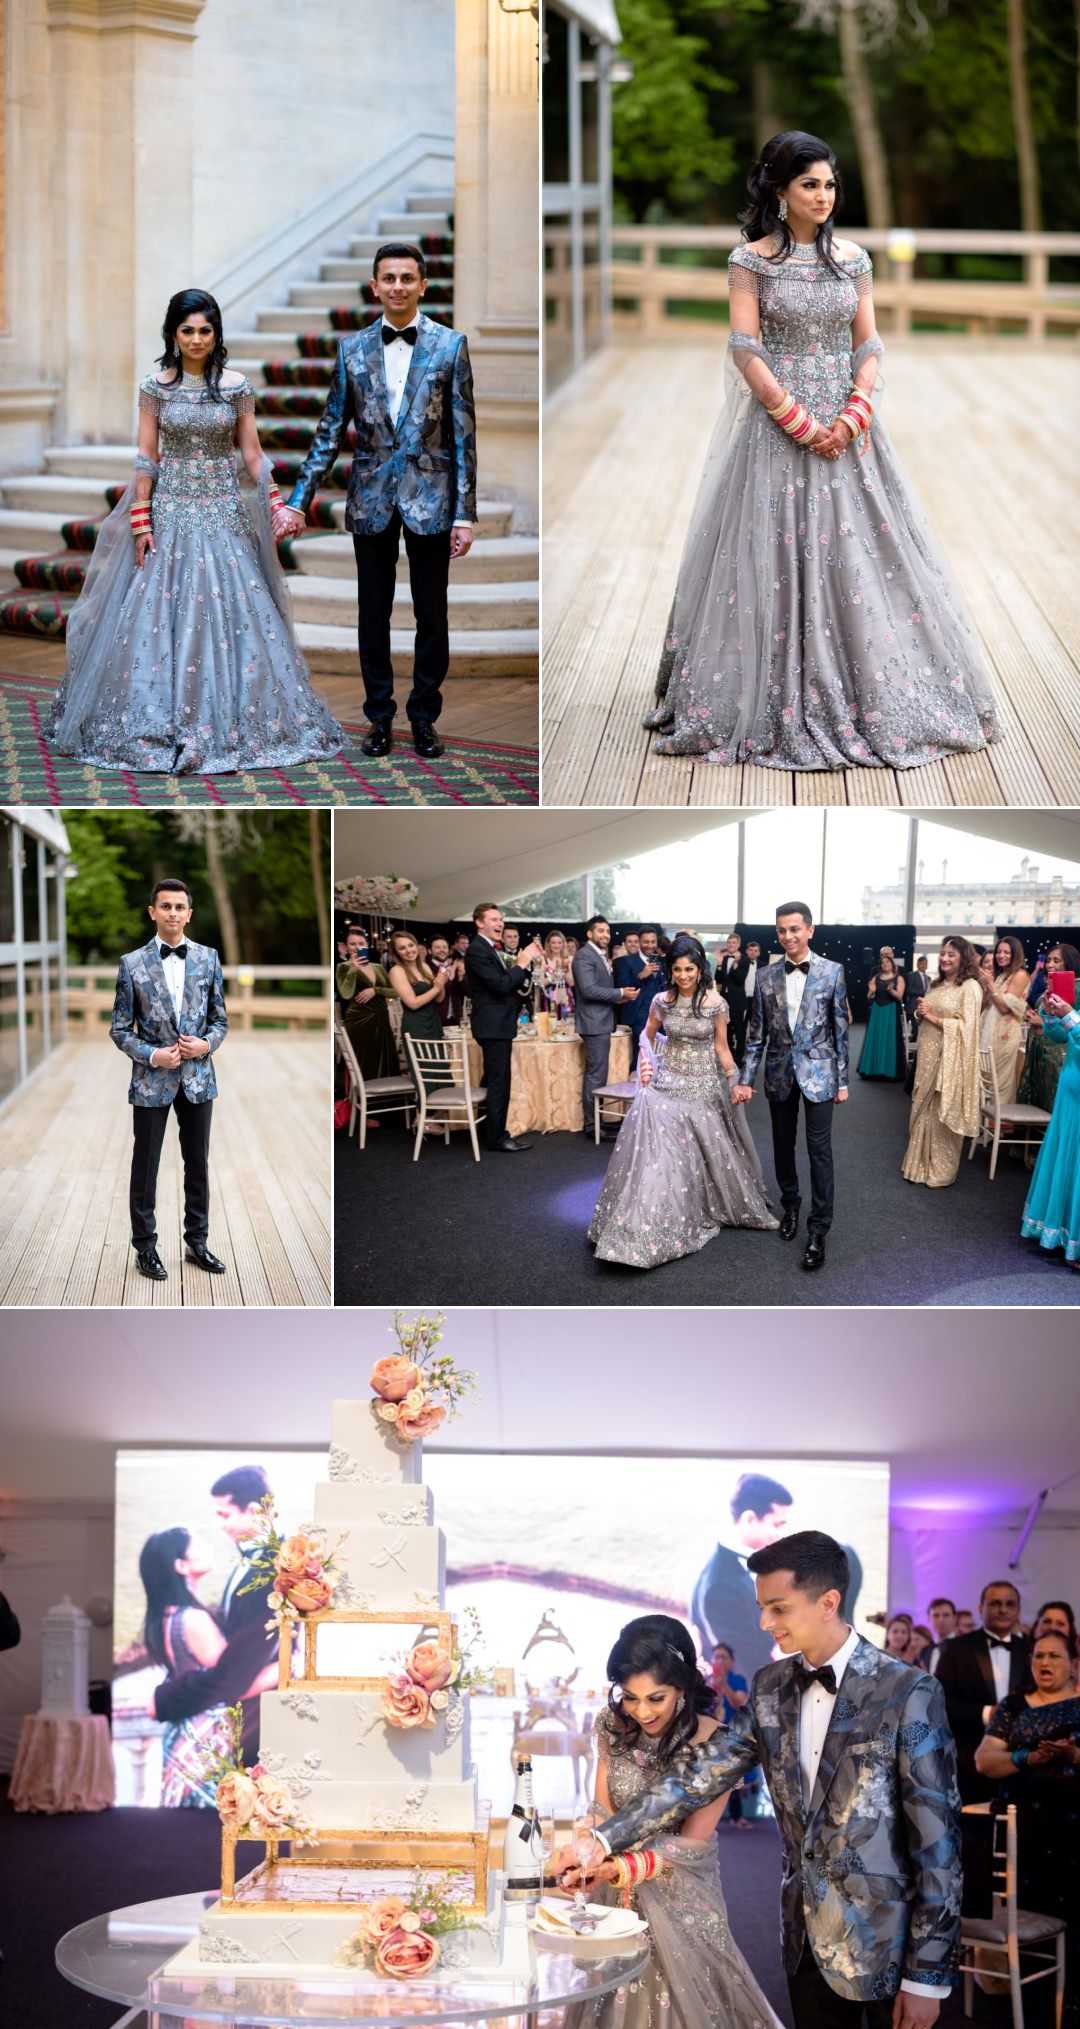 Reception outfits at Hethrop Park and the couples entrance to the marquee, plus the cake cutting.